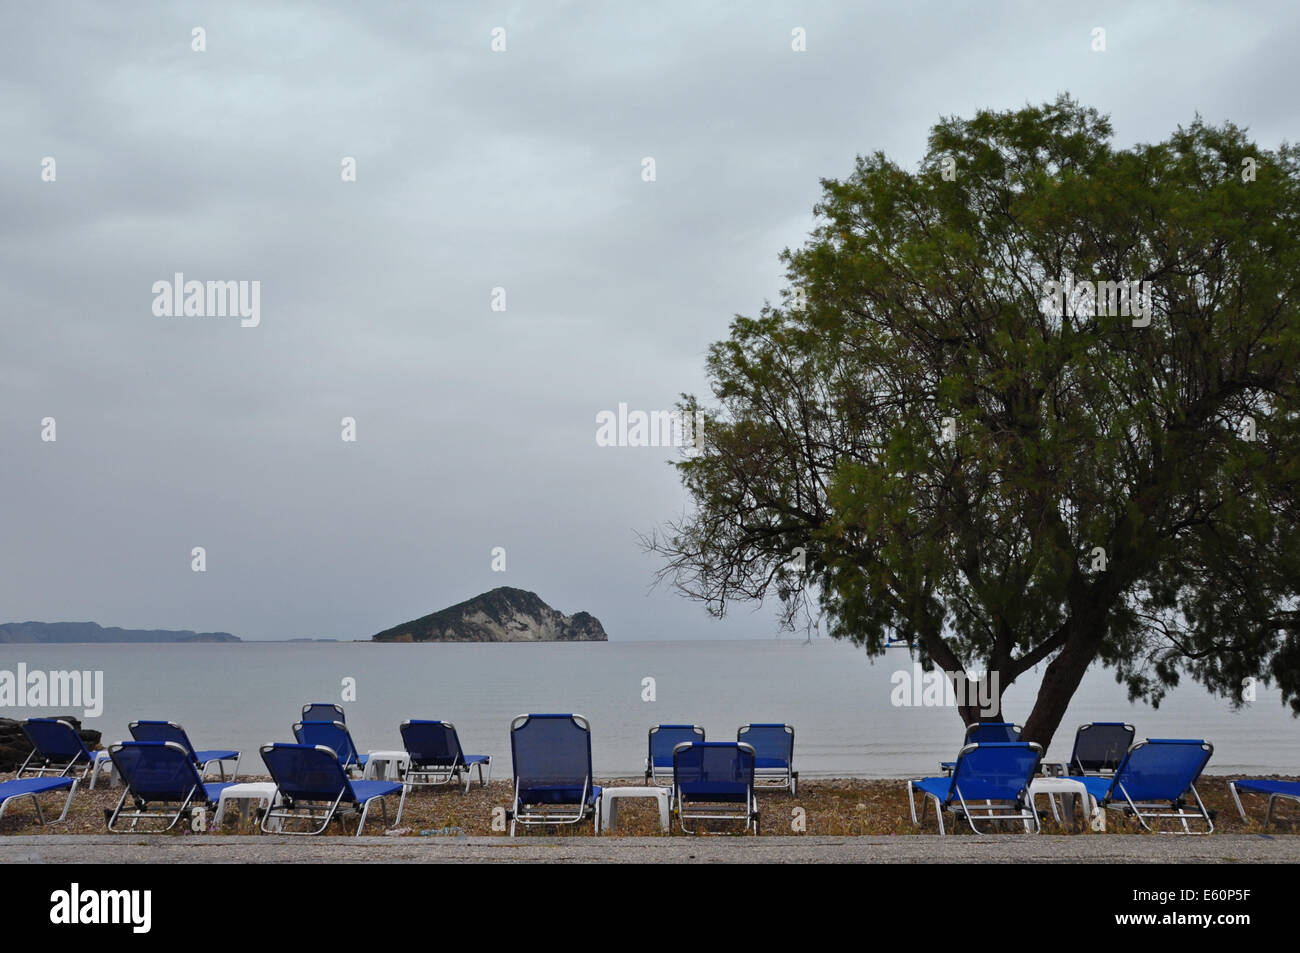 Lounge sunbed chairs with sea view tamarix tree and distant islet, Keri beach, Zakynthos Greece. Stock Photo